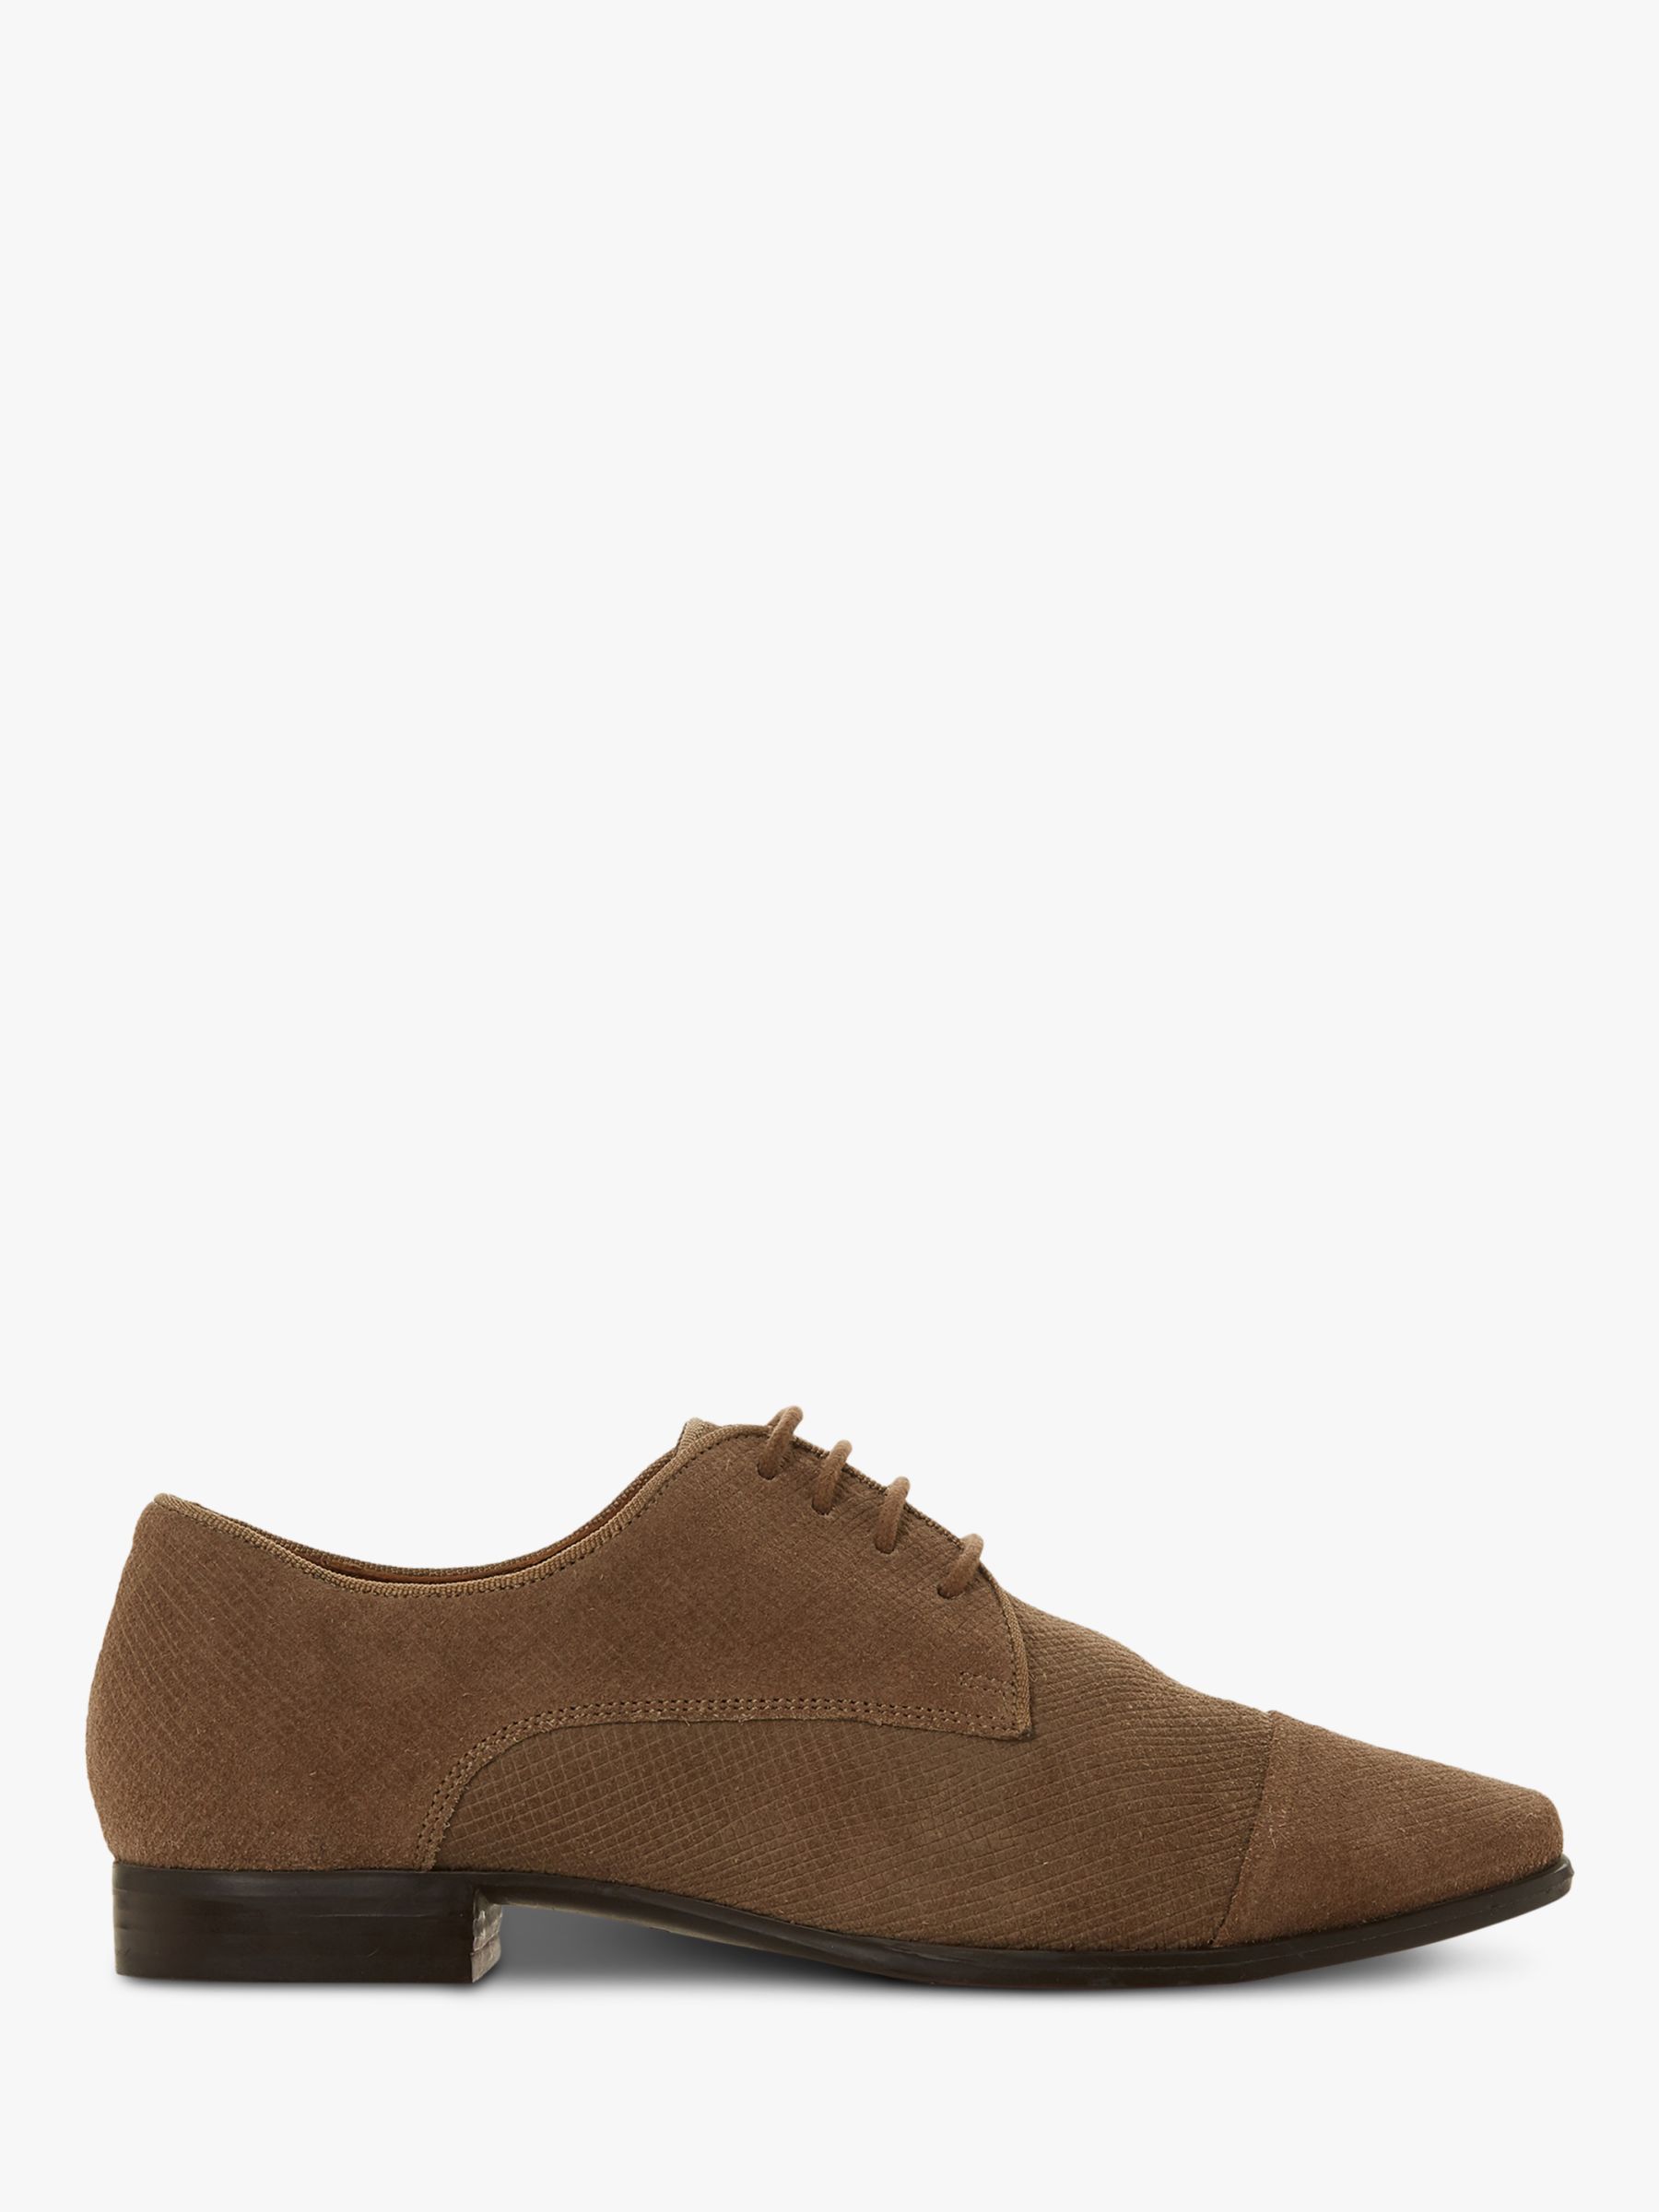 Dune Fentan Lace Up Casual Shoes